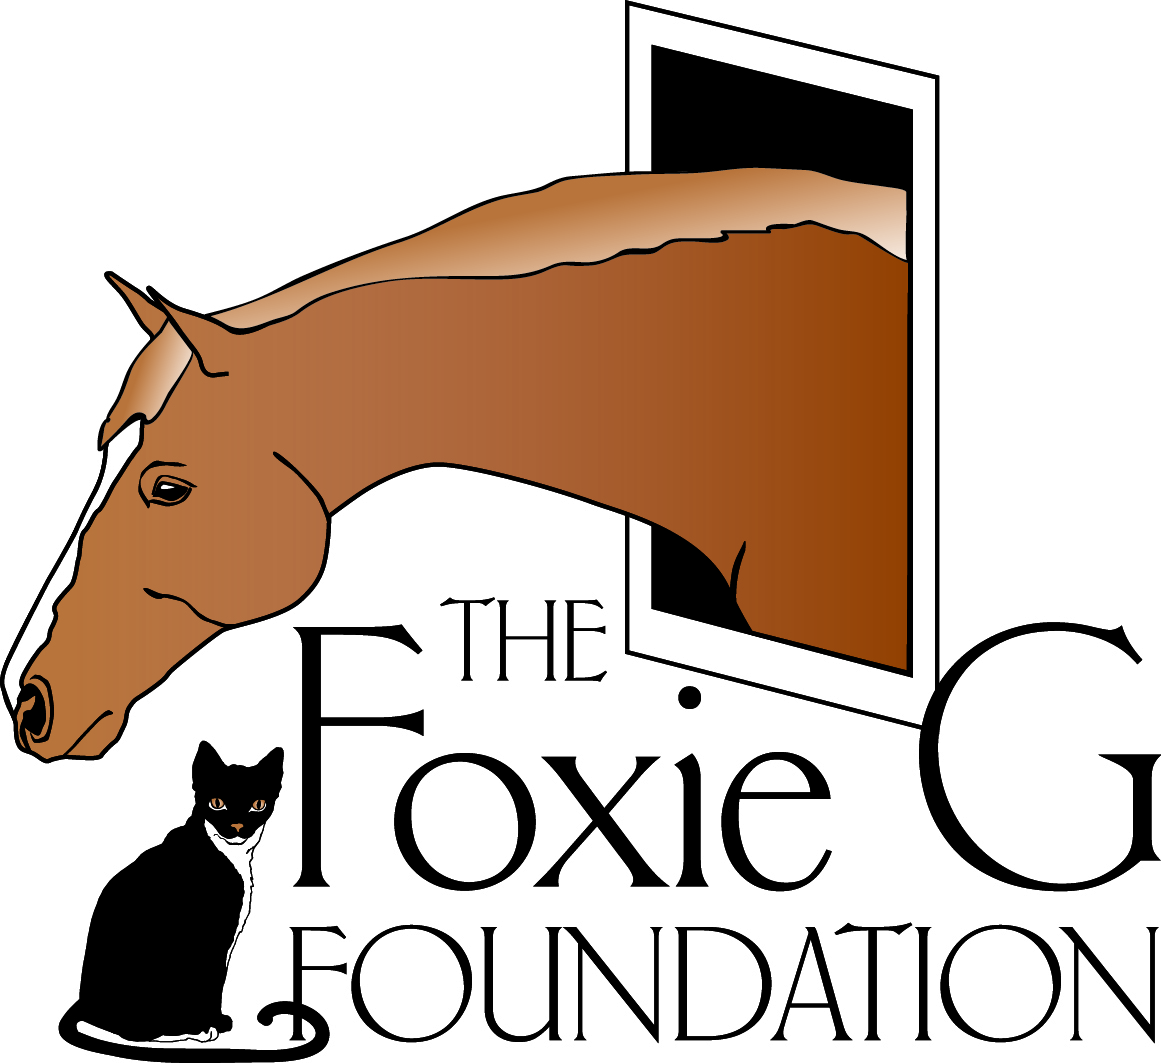 The Foxie G Foundation